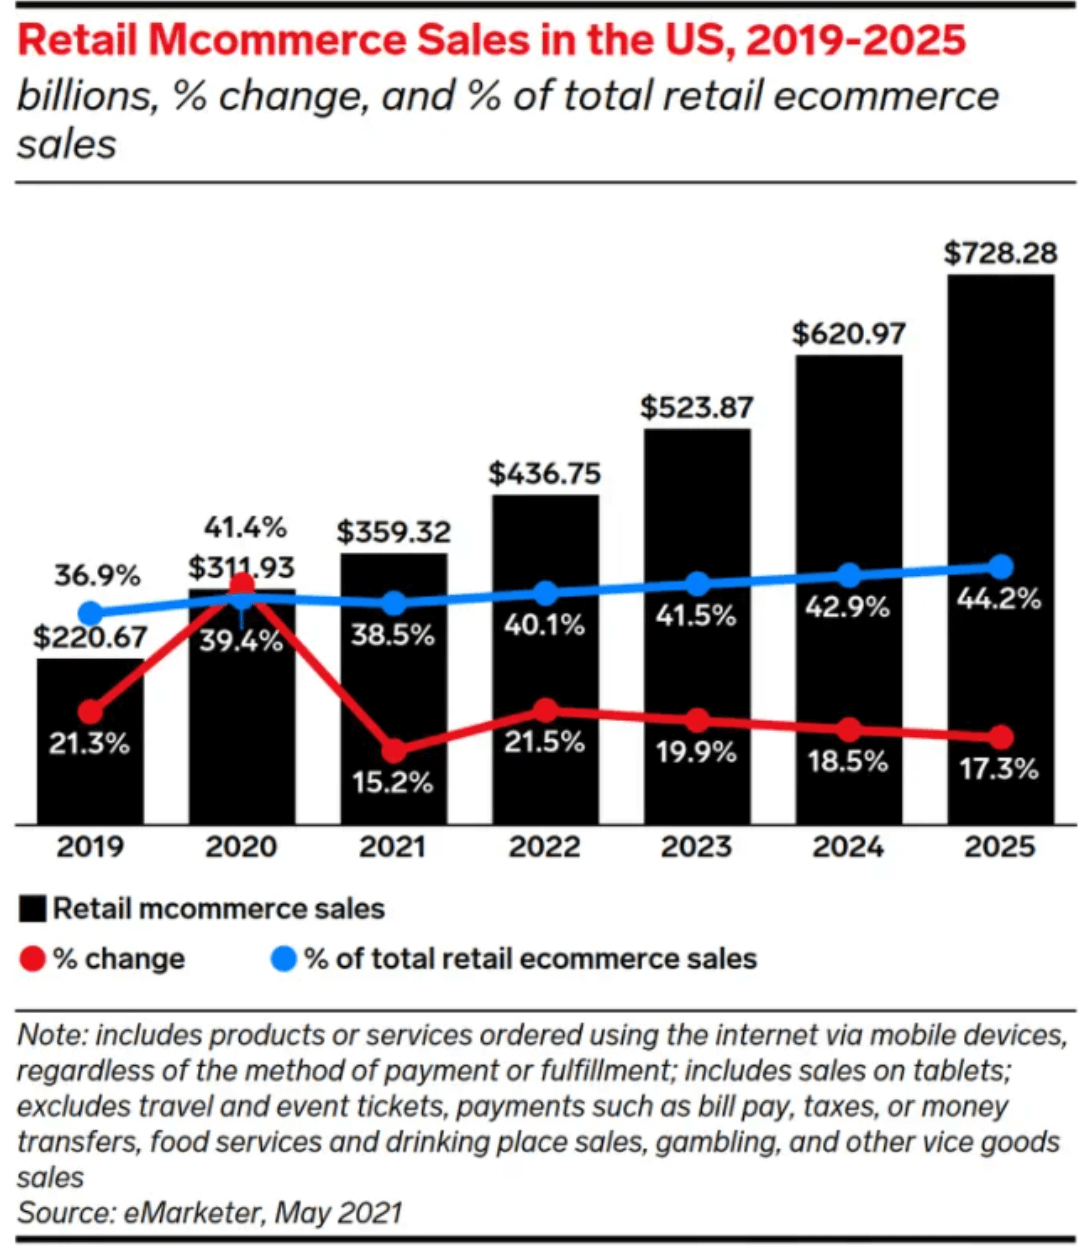 Retail mcommerce sales over time.